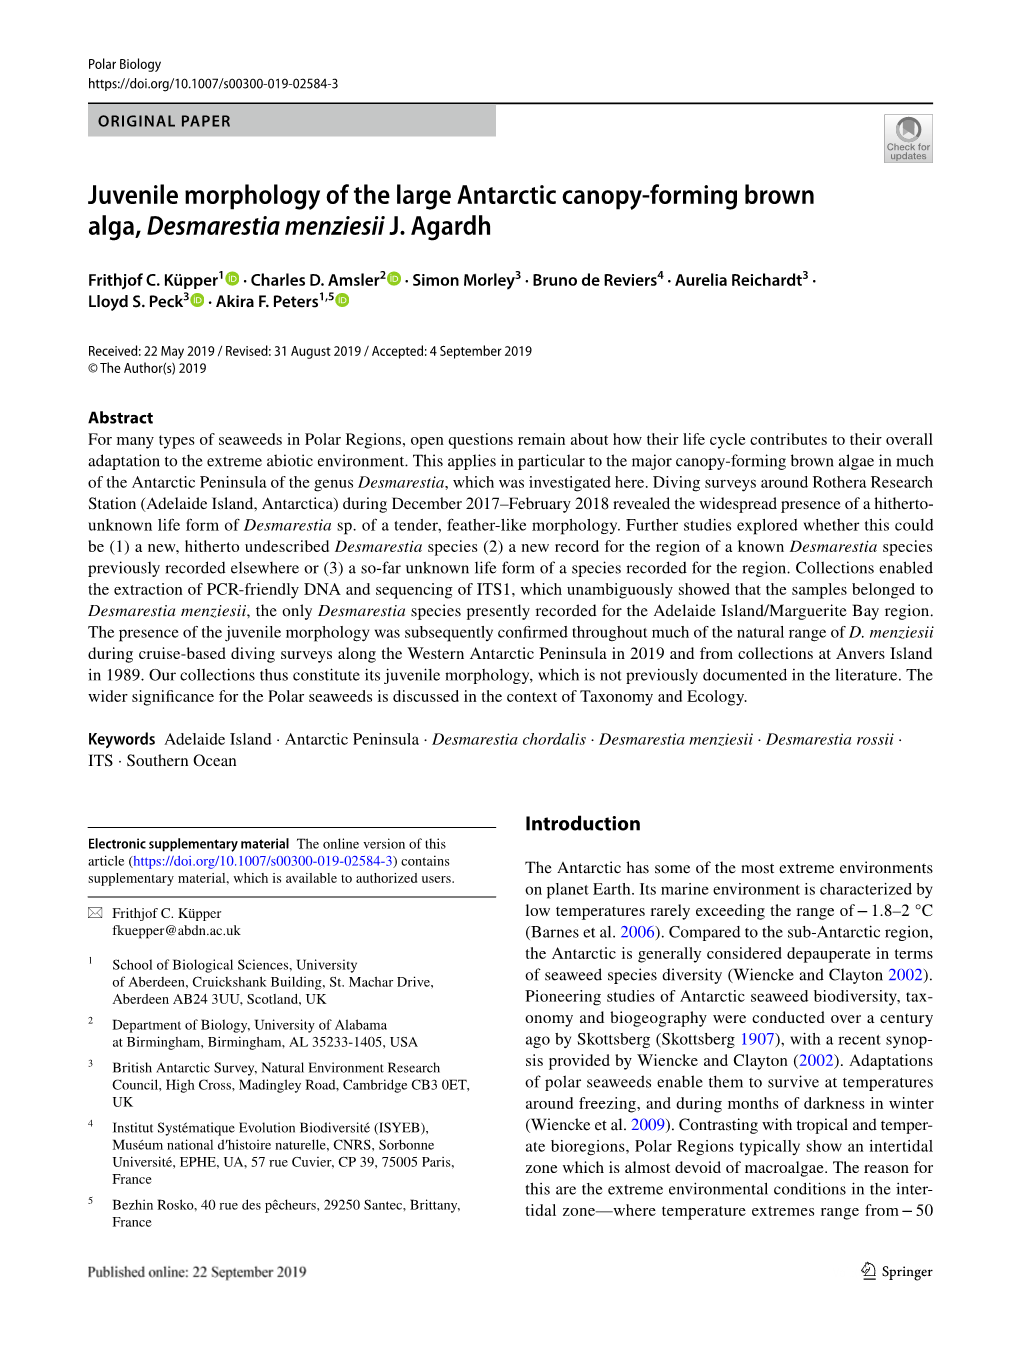 Juvenile Morphology of the Large Antarctic Canopy-Forming Brown